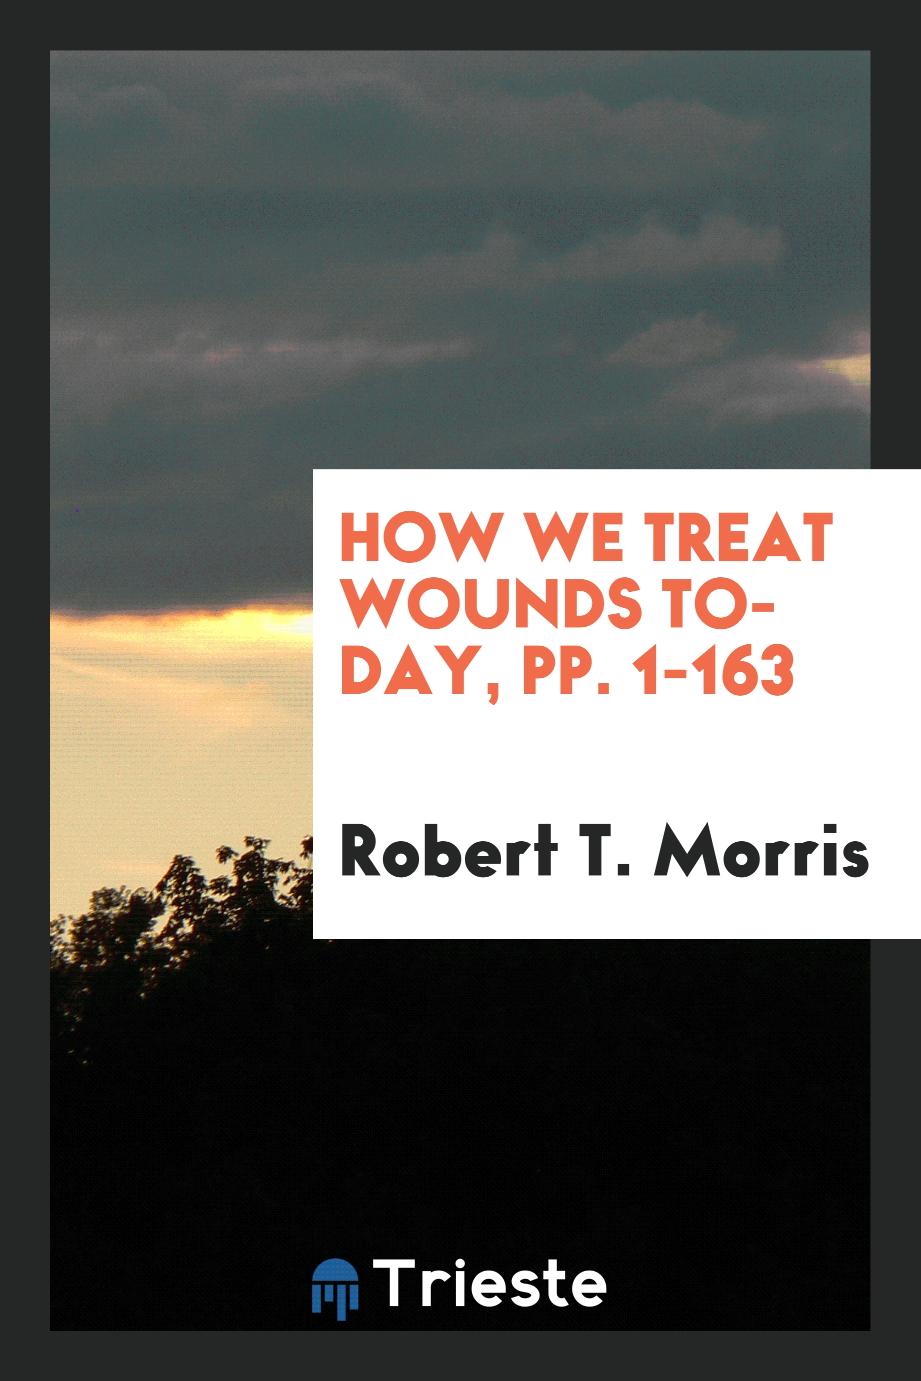 How We Treat Wounds To-Day, pp. 1-163